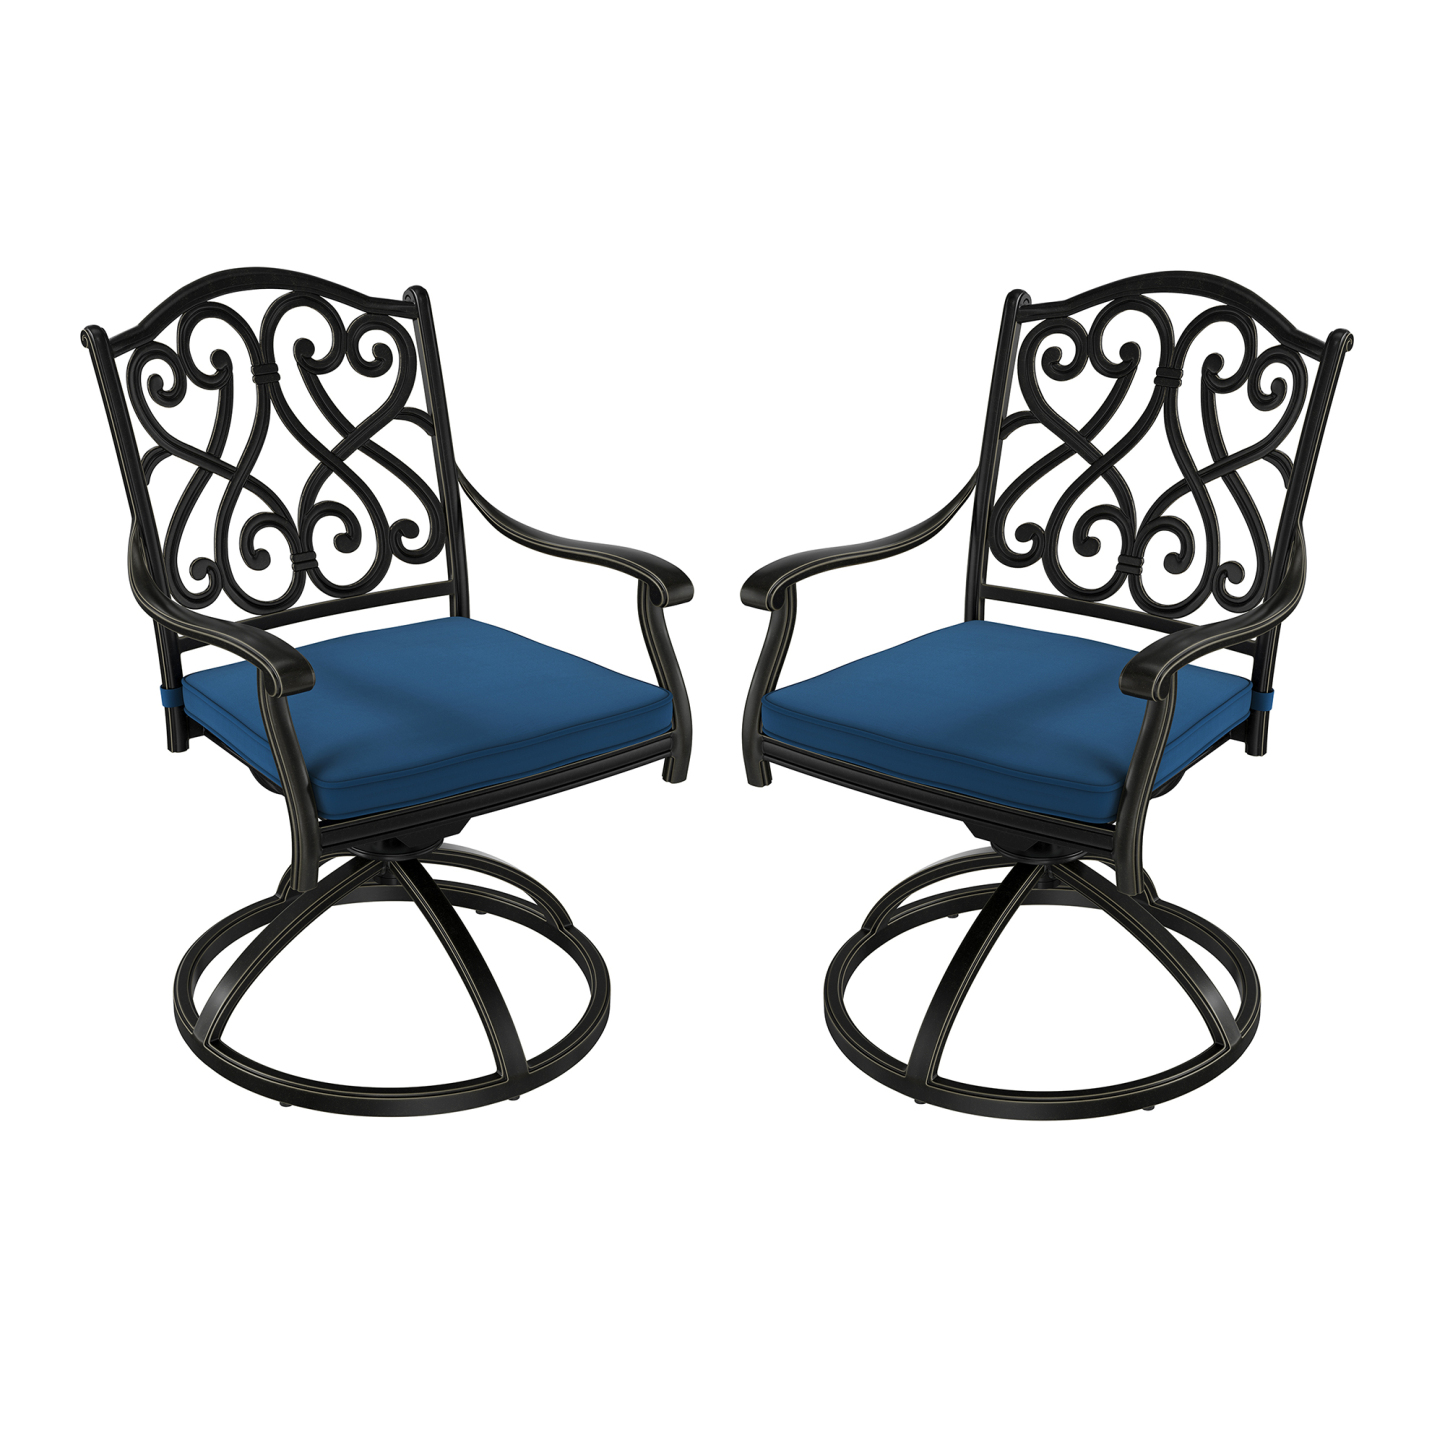 2-Piece Cast Aluminum Dining Chair Set with Thick Olefin Cushions and